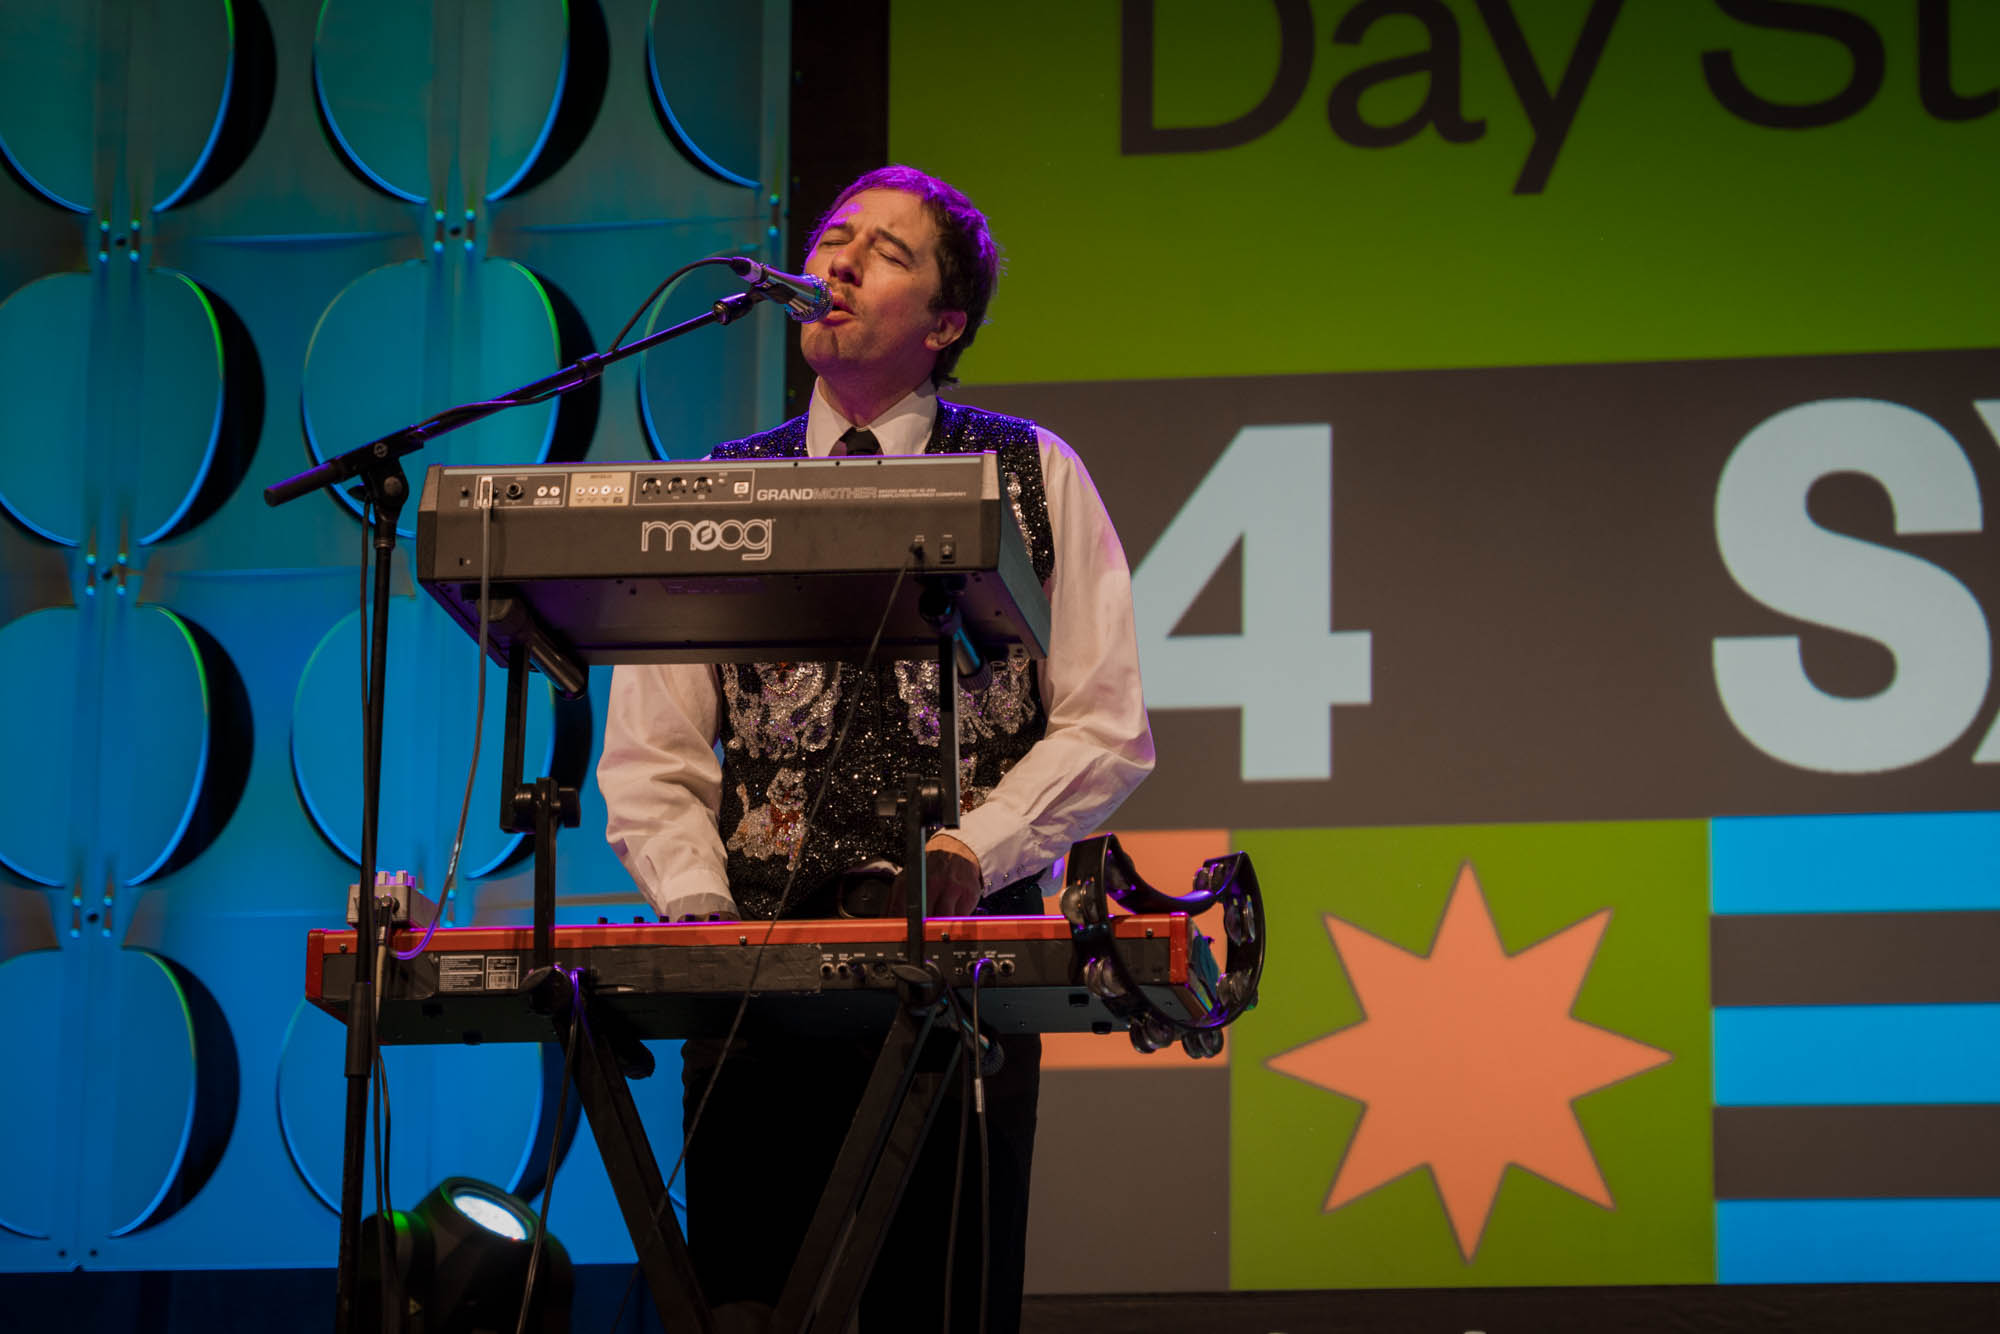 A musician playing keys on stage